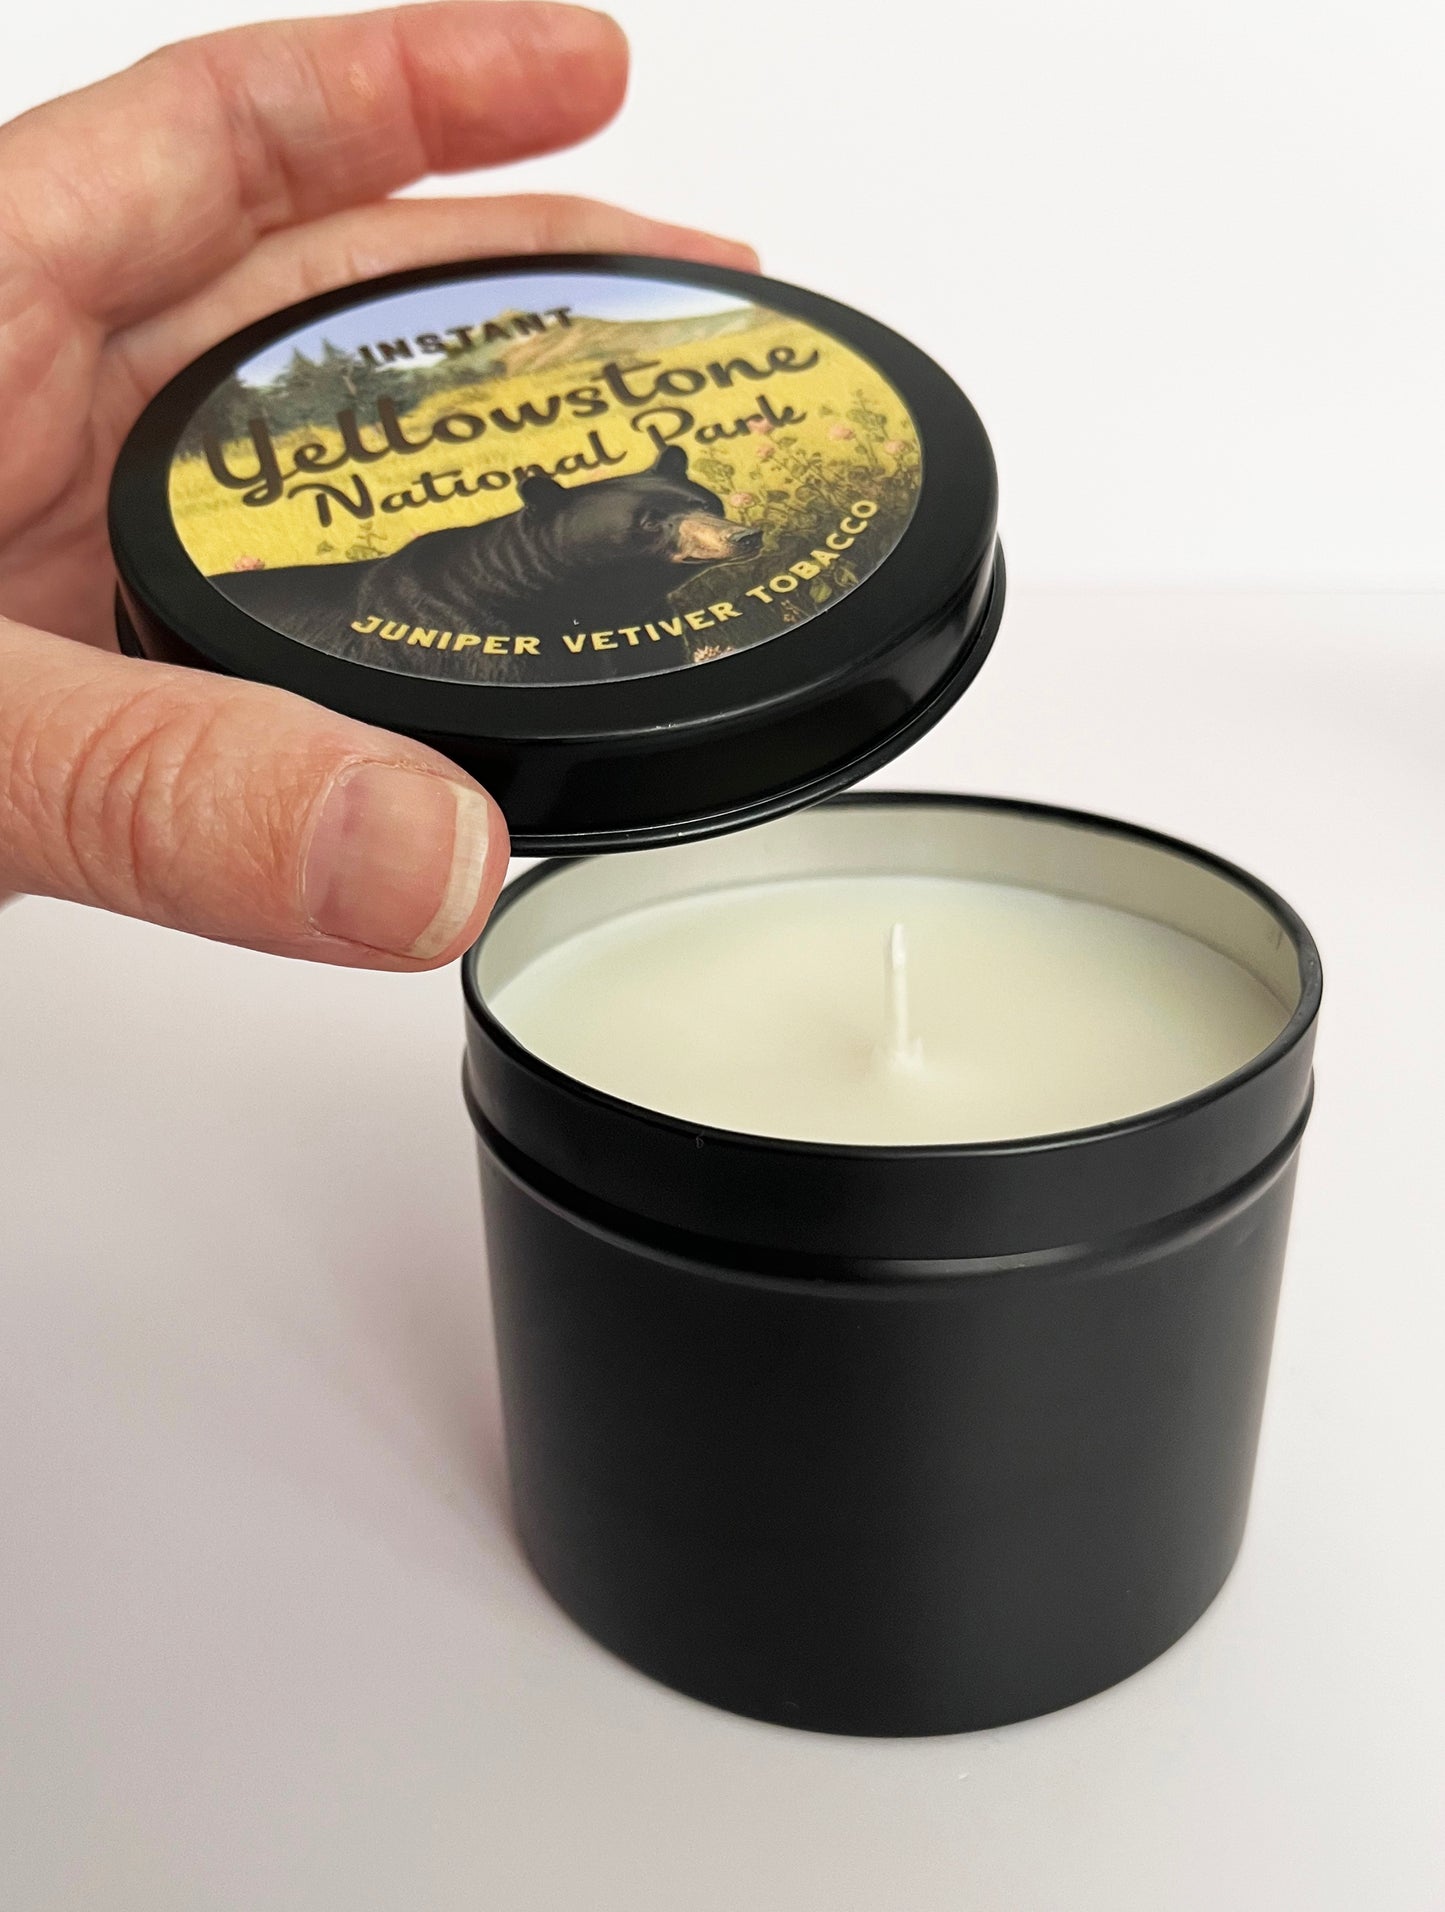 Instant Yellowstone National Park Scented Candle Tin - NEW 8oz Size